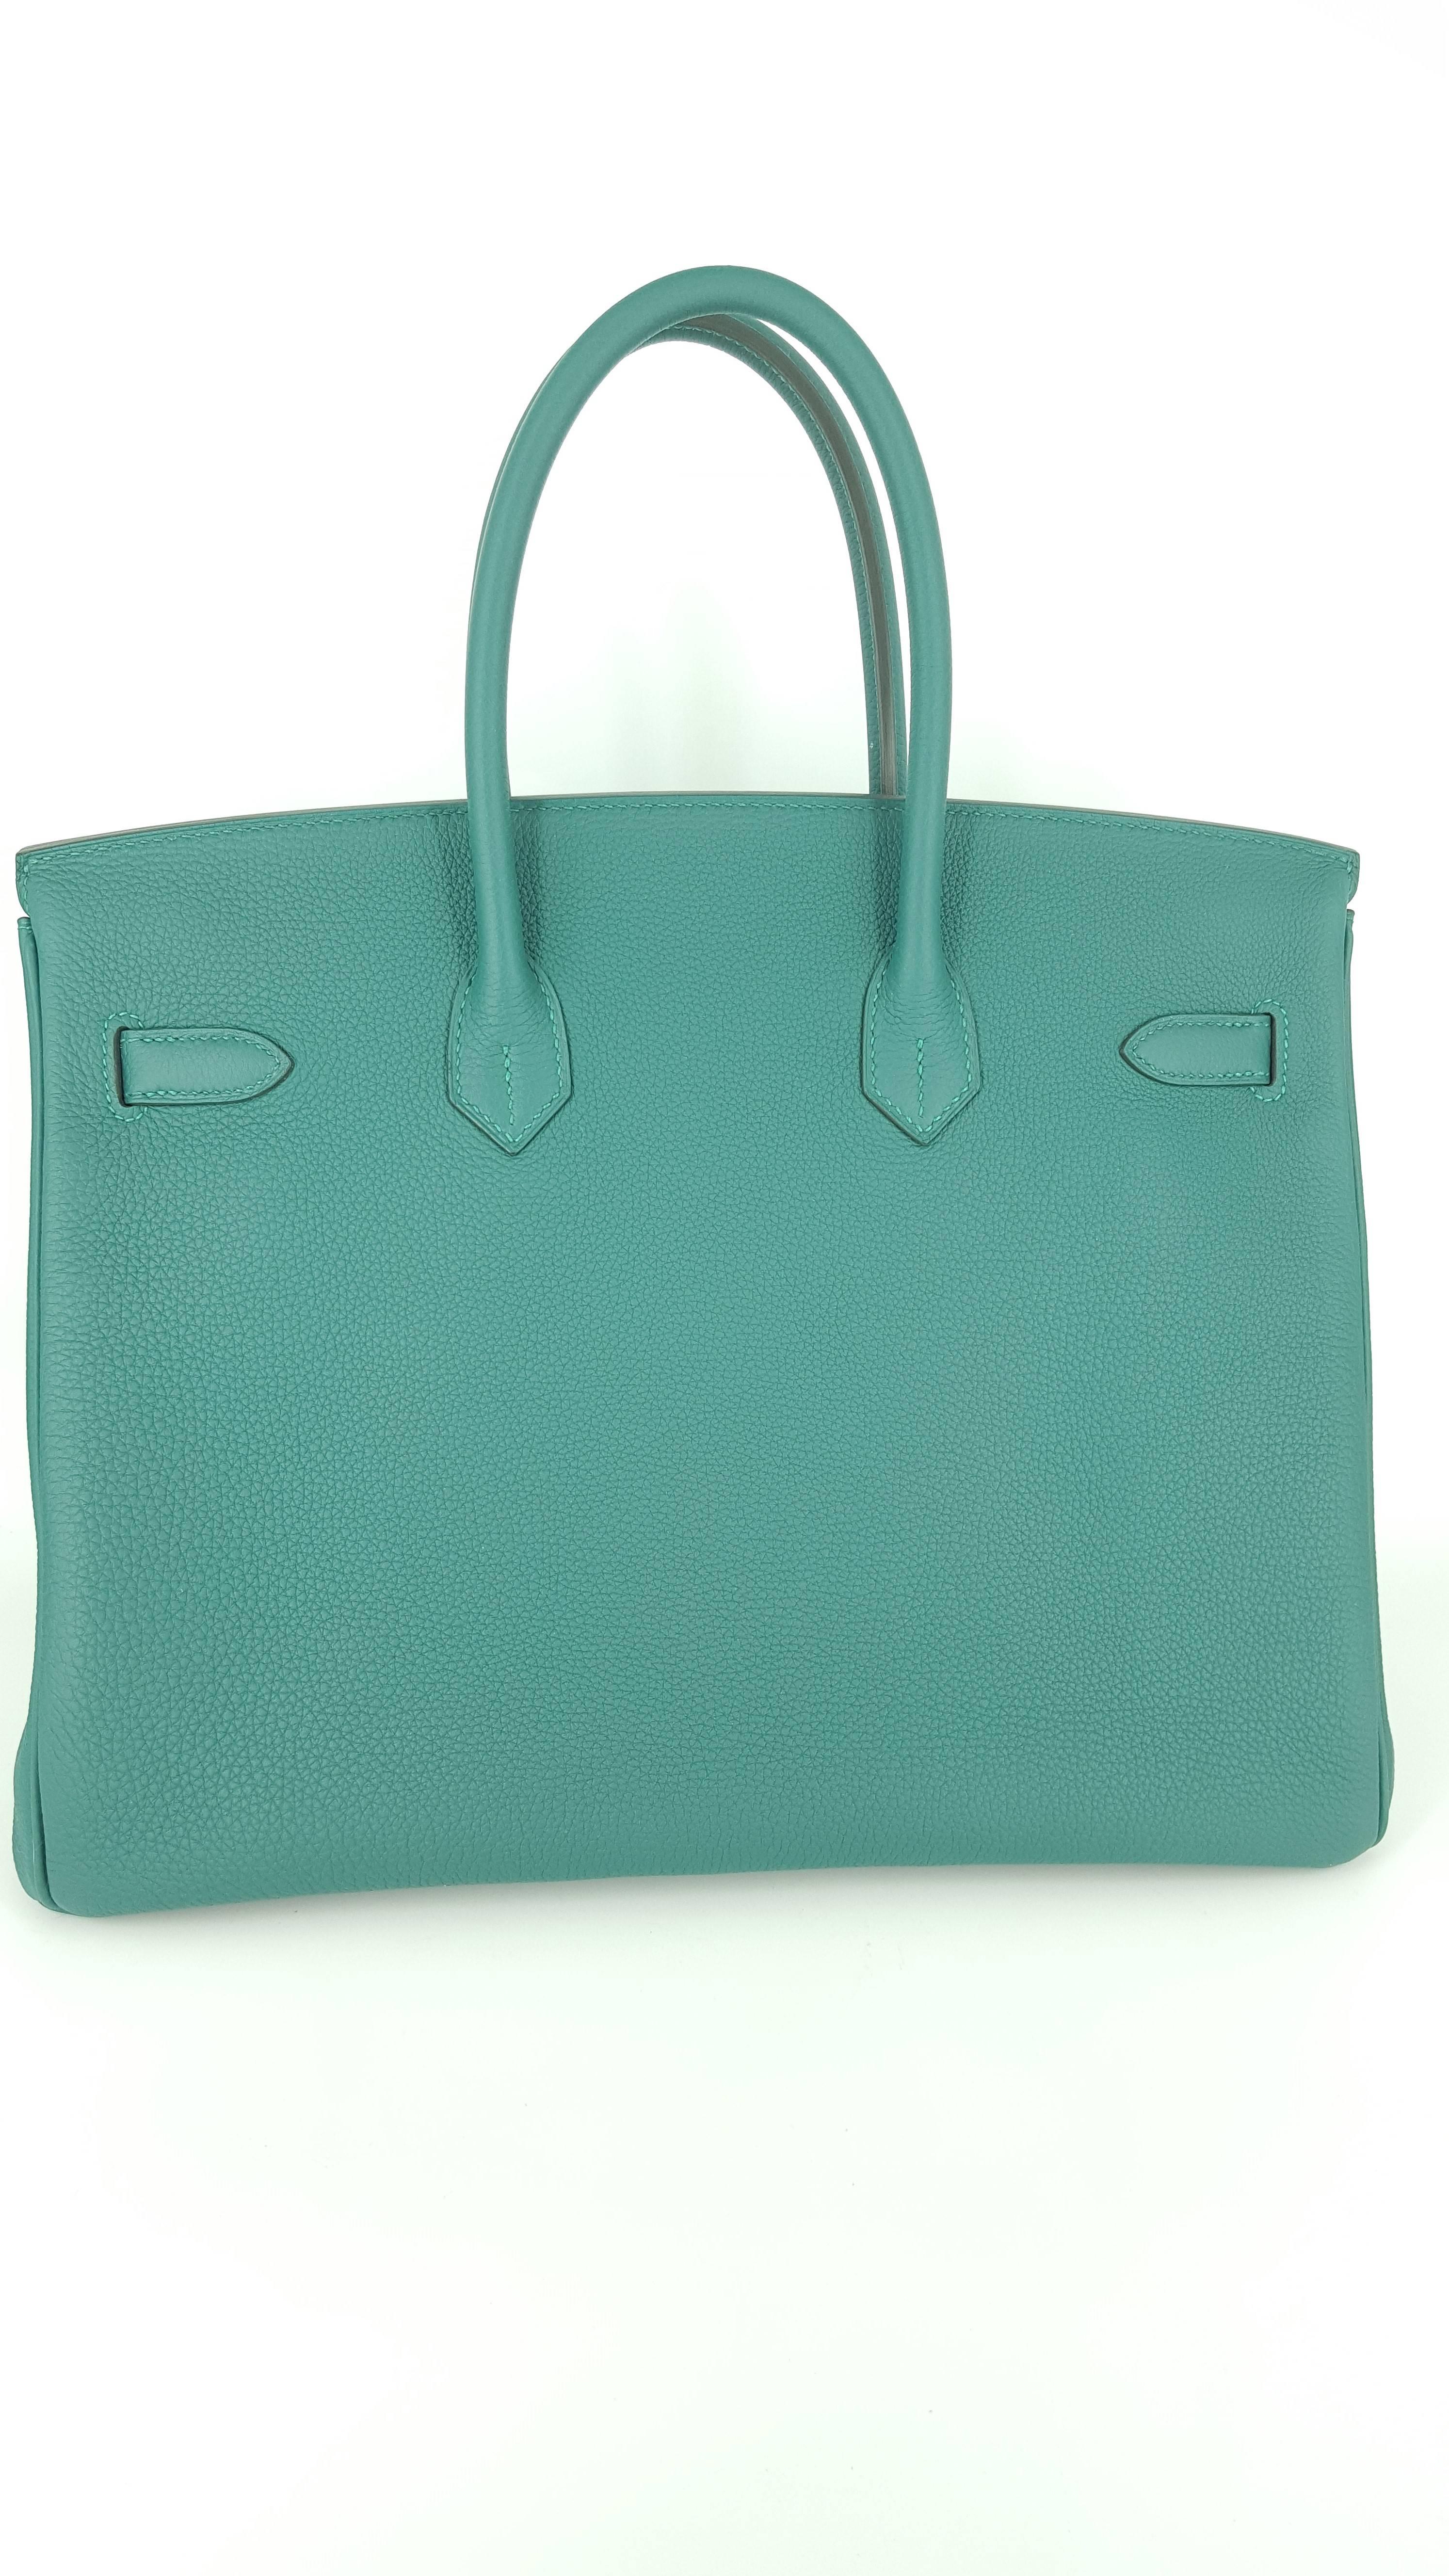 Offered for sale is a New Hermes Birkin 35 in the beautiful color Malachite.
This bag was purchased in January 2017 and It still has some plastic on feet.  The Palladium hardware enhances the richness of this limited edition color.  It is complete